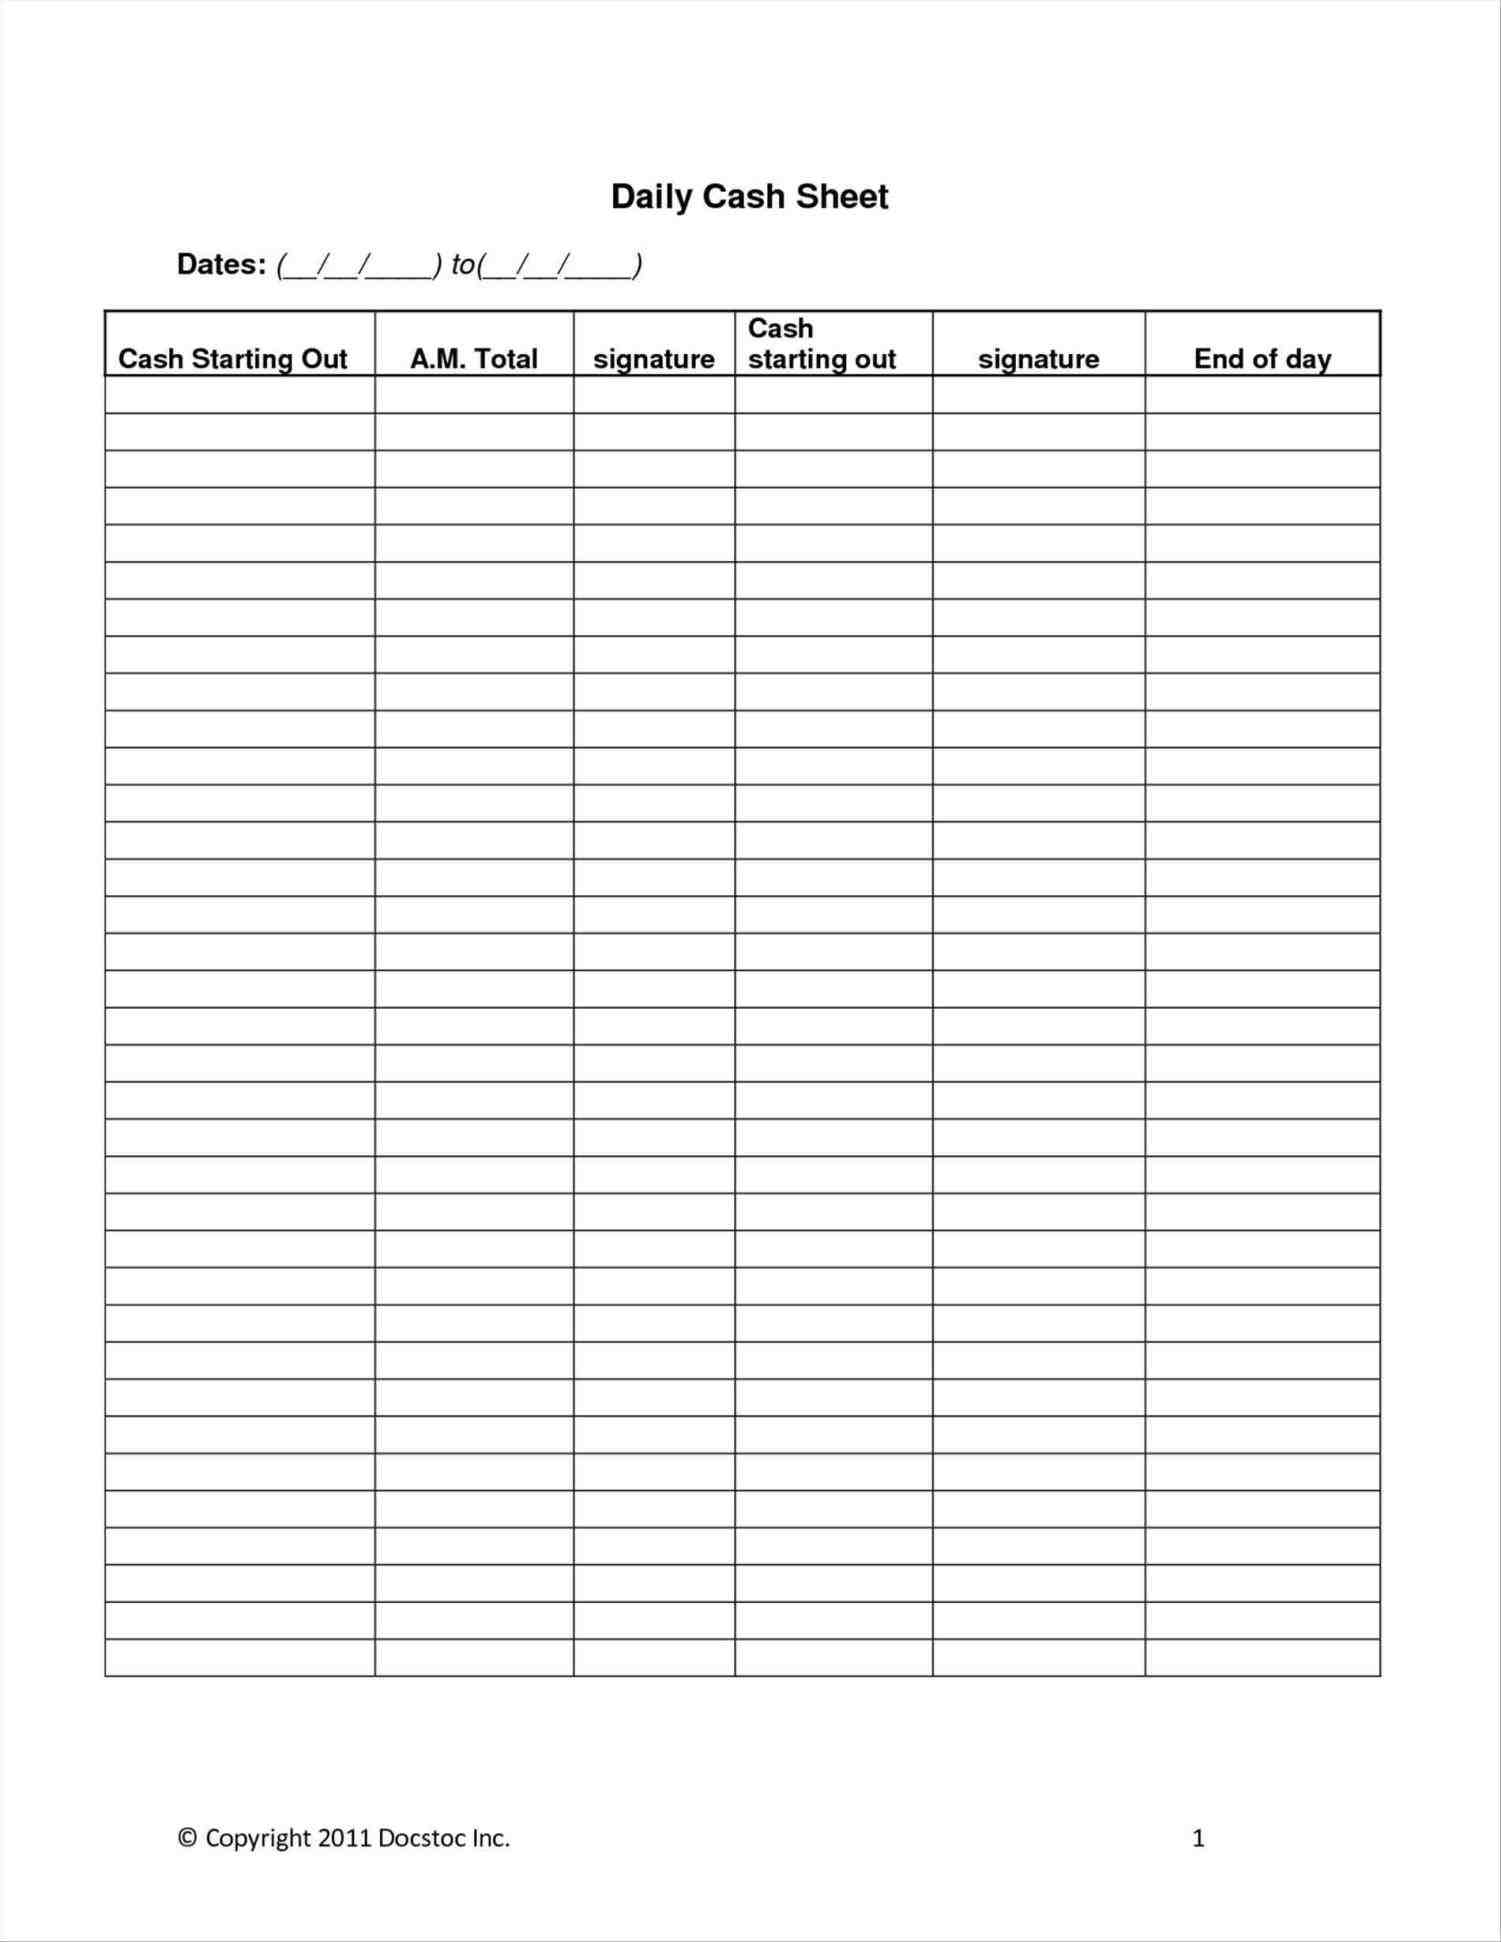 cash sheet template proof of working excel image collections templates example cash Daily Cash Sheet Template sheet template excel image